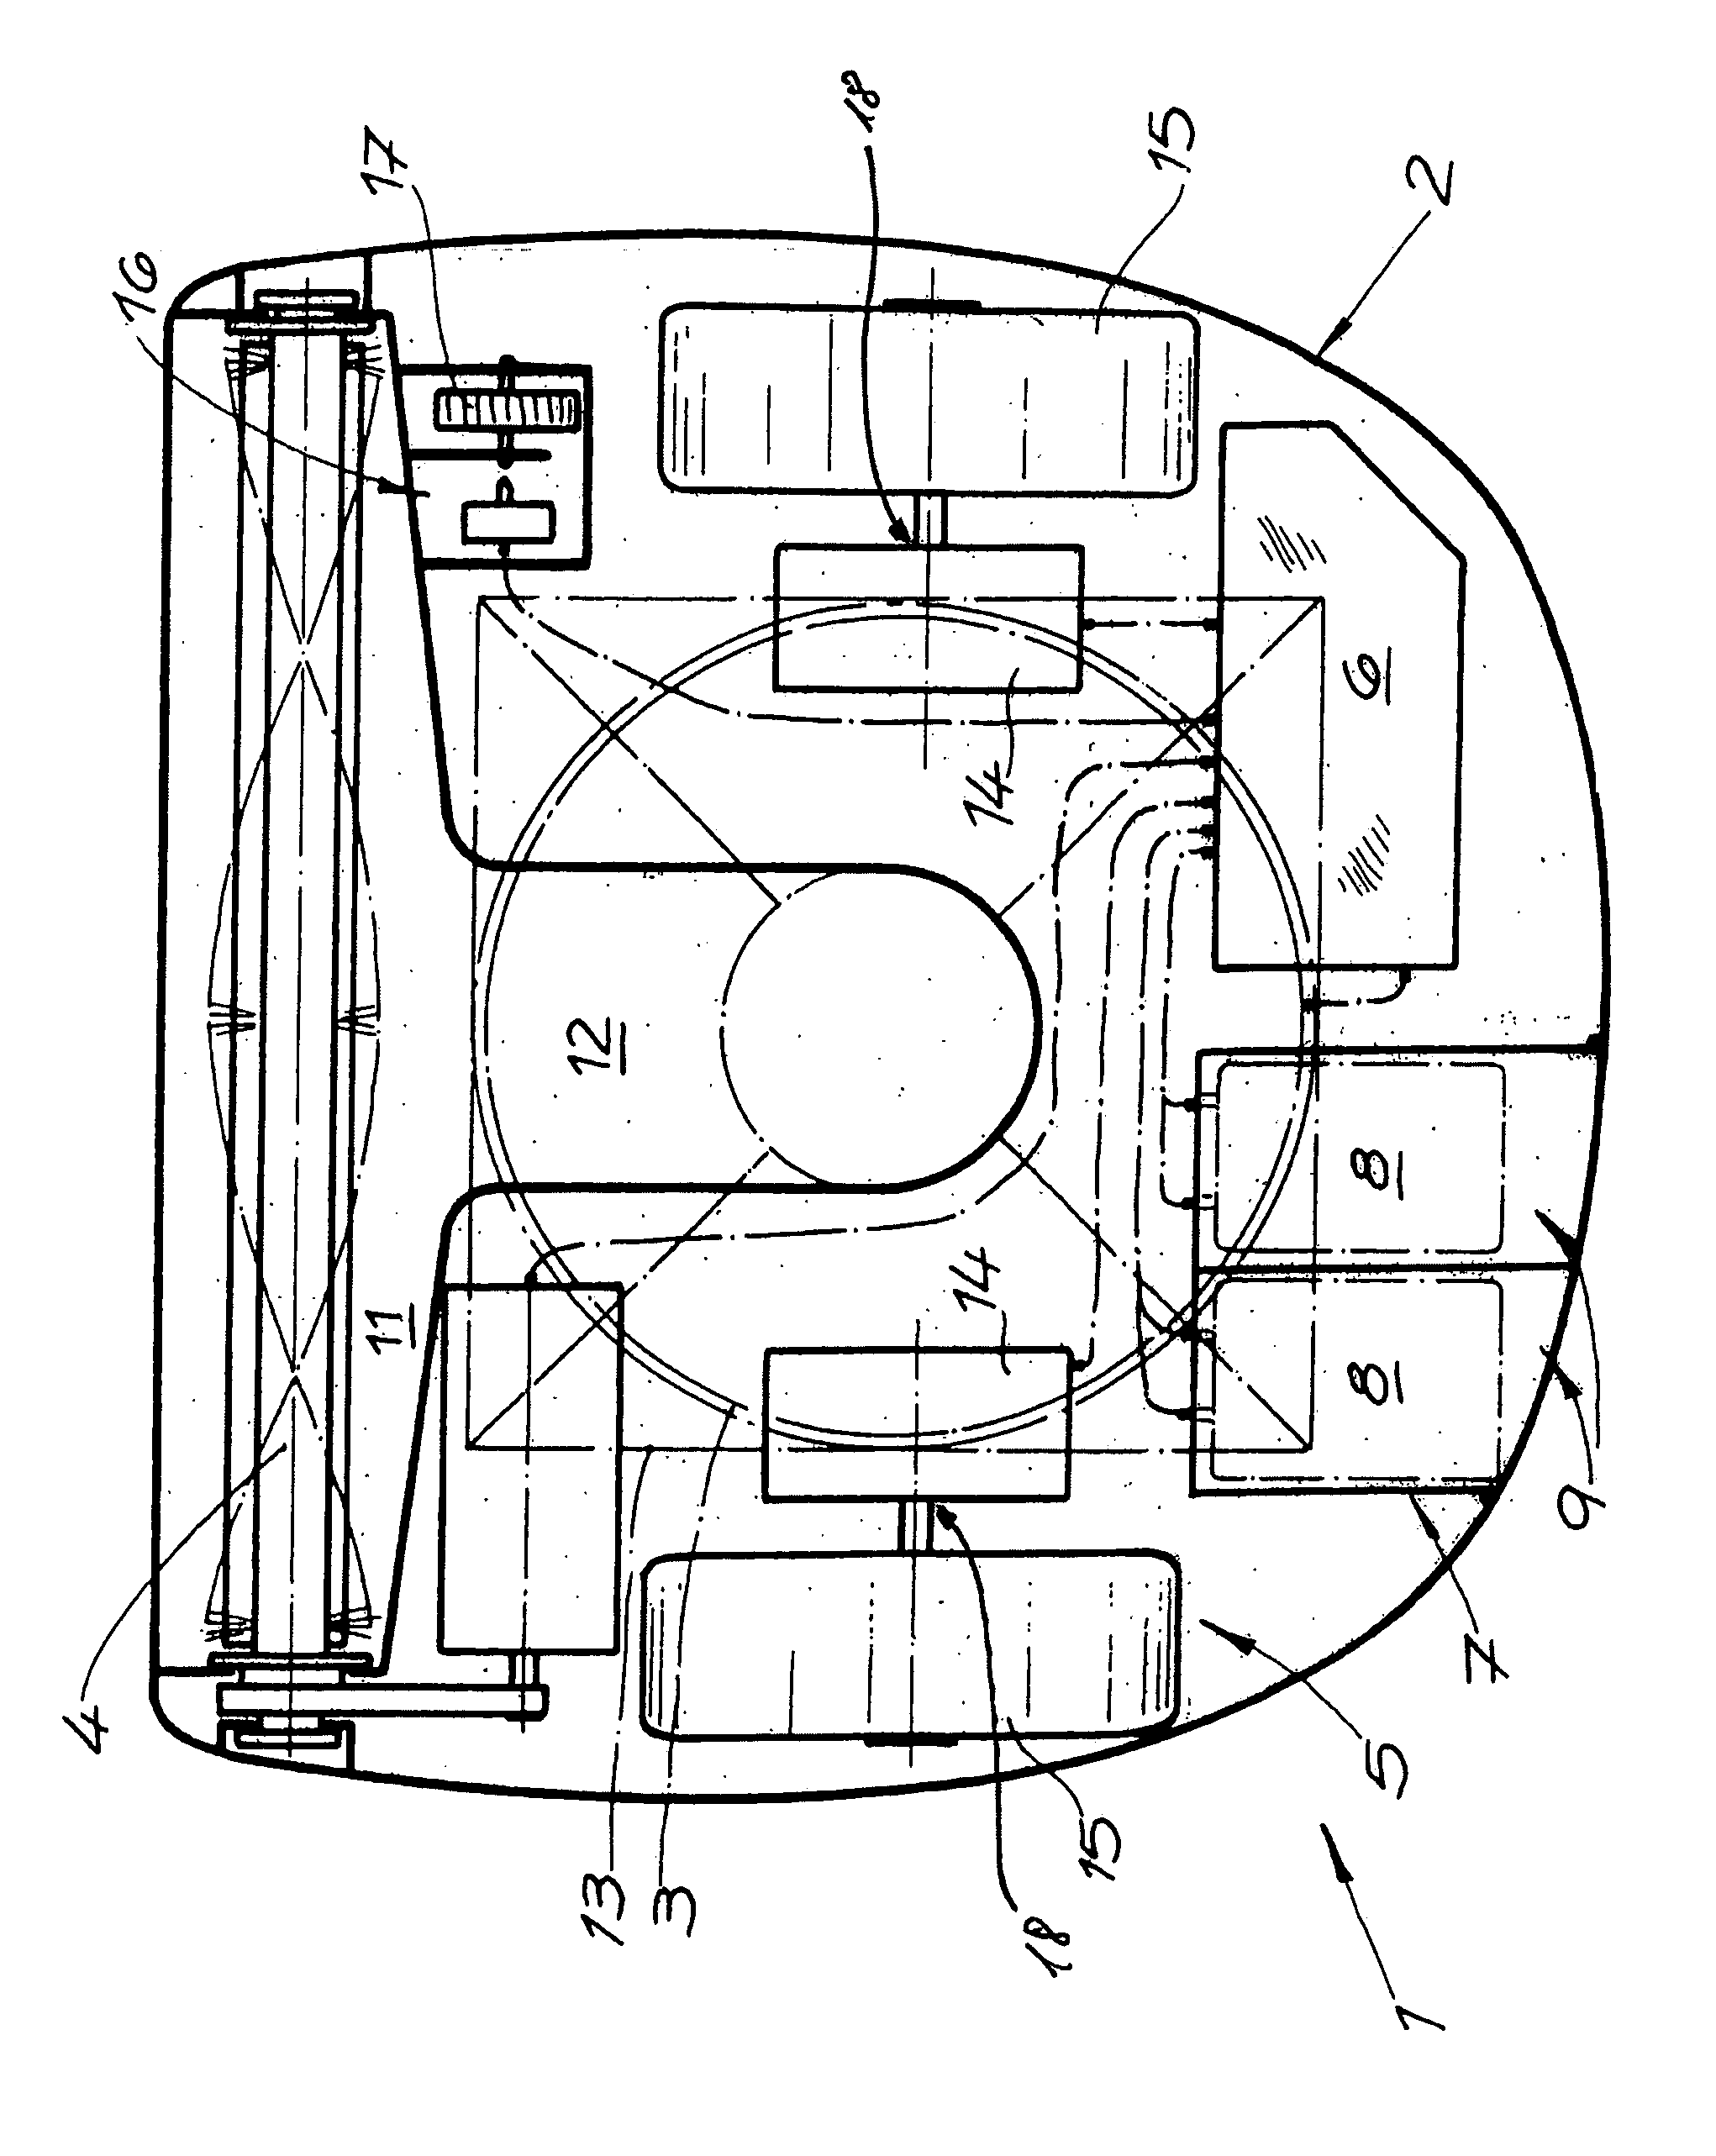 Self-propelled vacuum-cleaning device